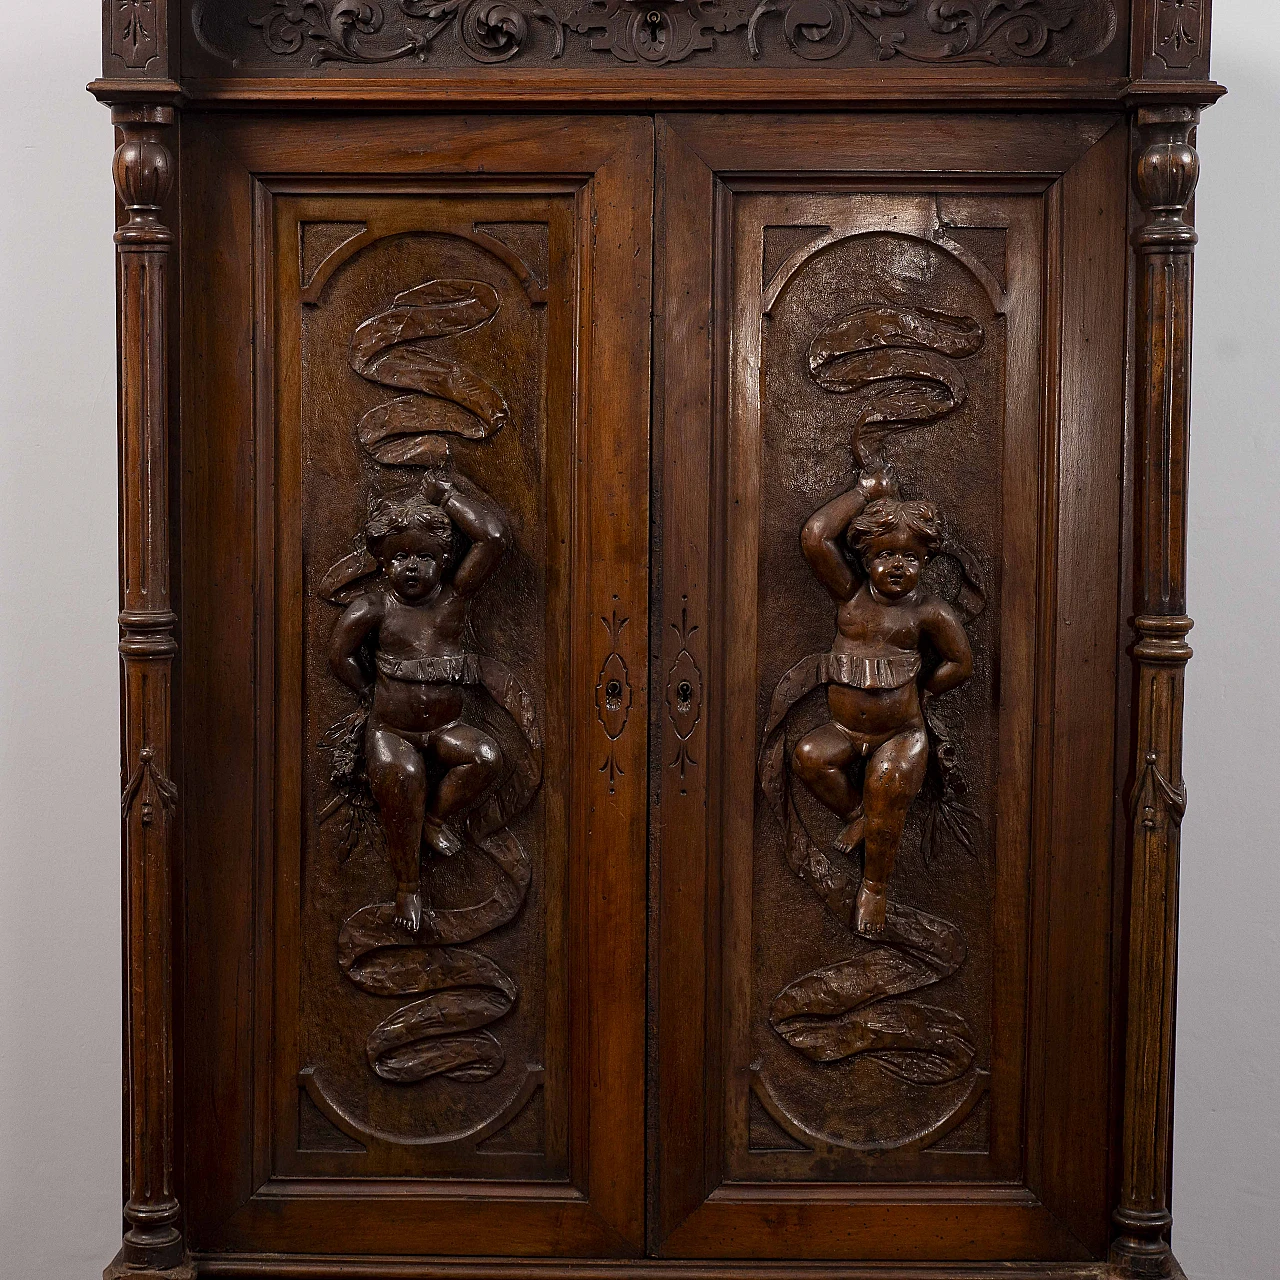 Wood secrétaire with carvings, late 19th century 6